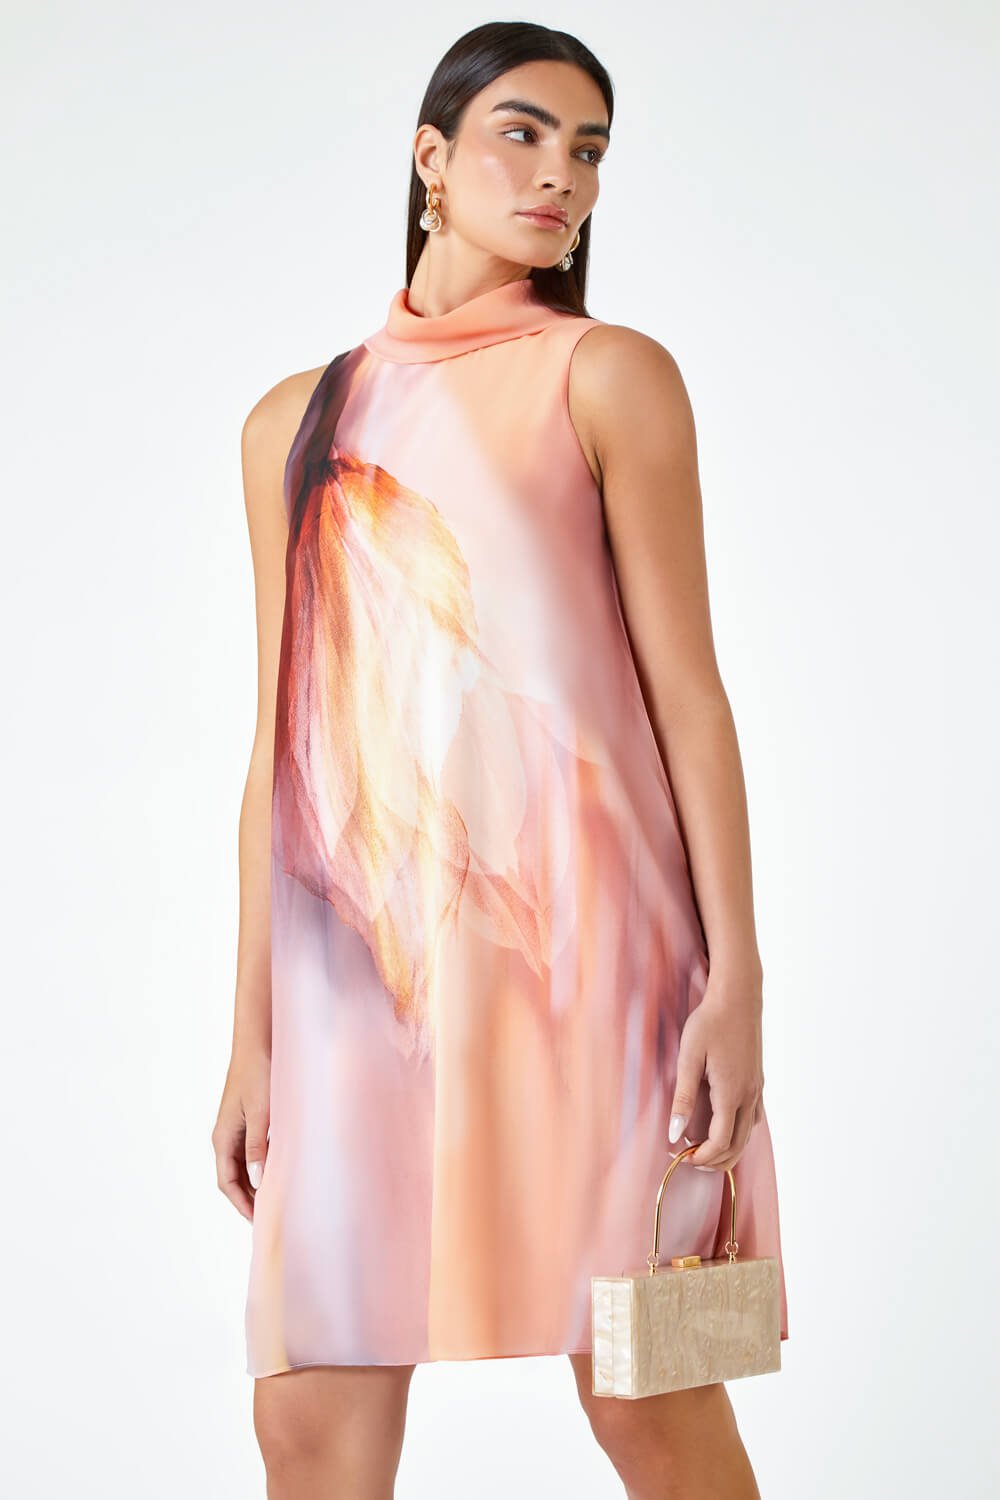 Peach LIMITED Printed High Neck Shift Dress, Image 2 of 5